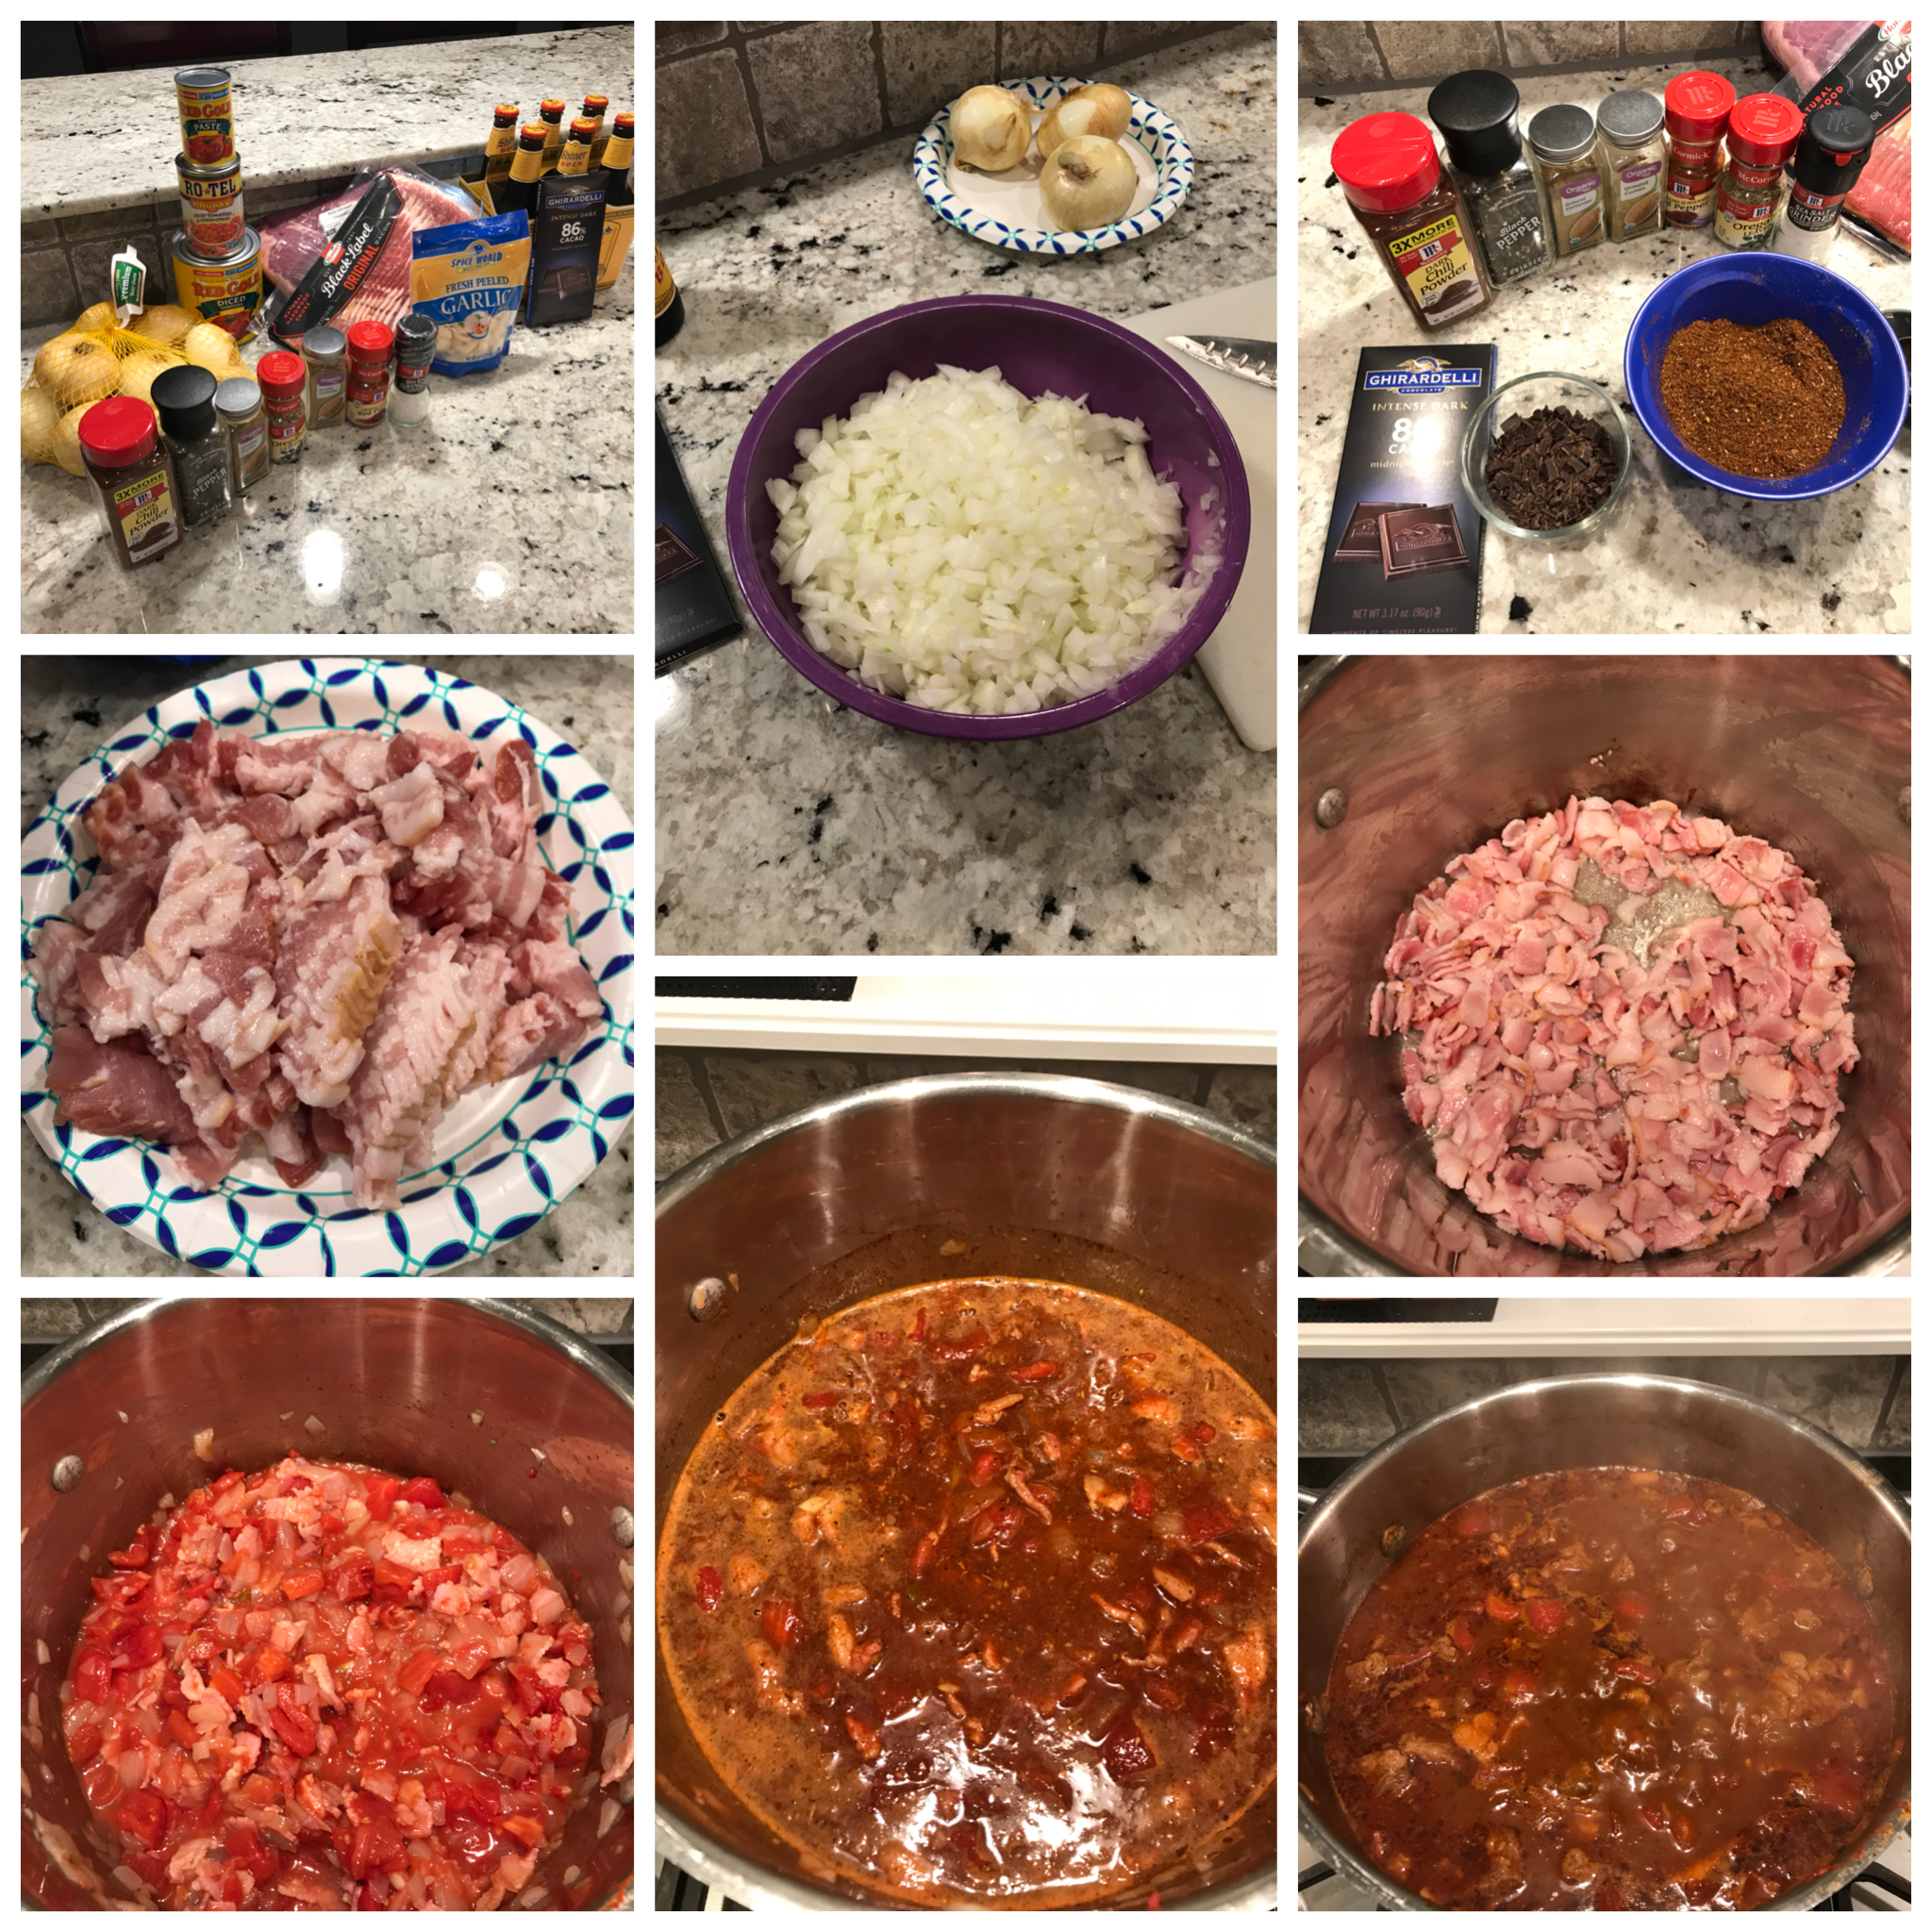 Cooking Chili - Montage